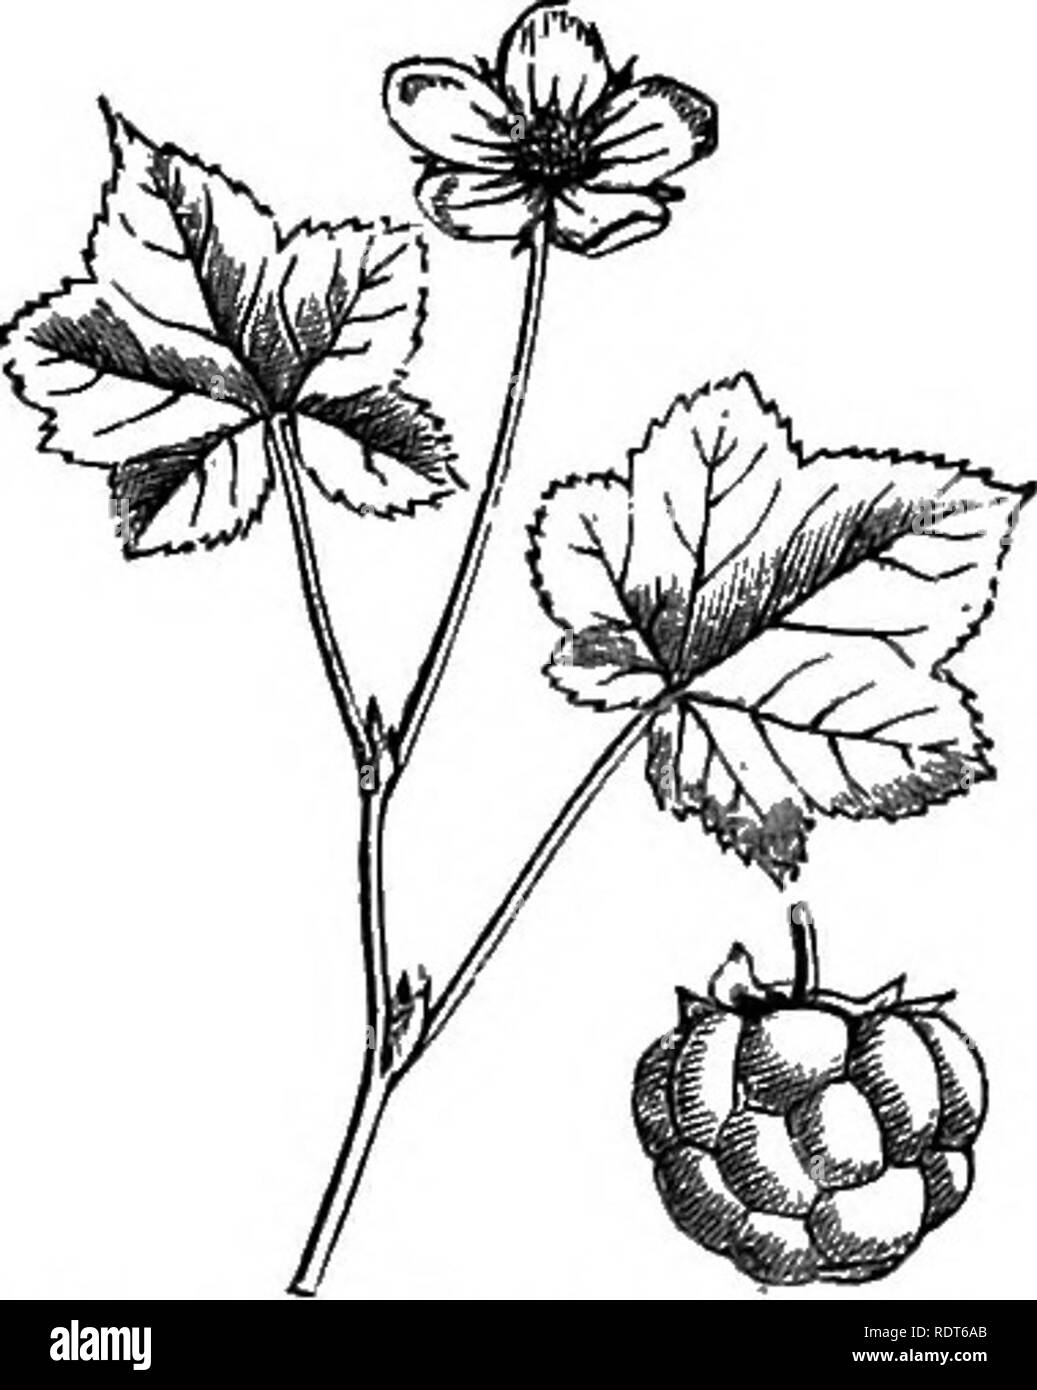 . My garden, its plan and culture together with a general description of its geology, botany, and natural history. Gardening. THE CLOUDBERRY. There are two allied species of Cloudberries, the Rubus arcticus and Rubus CltamcEmorus (fig. 390), which have been planted. The first lives, but has not done well. Dr. Fergus, who recently visited Norway, was so kind as to procure me a large number of roots of the Norway Cloudberry^ which has an historical interest, having been eaten by Linnffius when suffering from fever. I have made a deep plantation of peat, and over this I have planted the roots in  Stock Photo